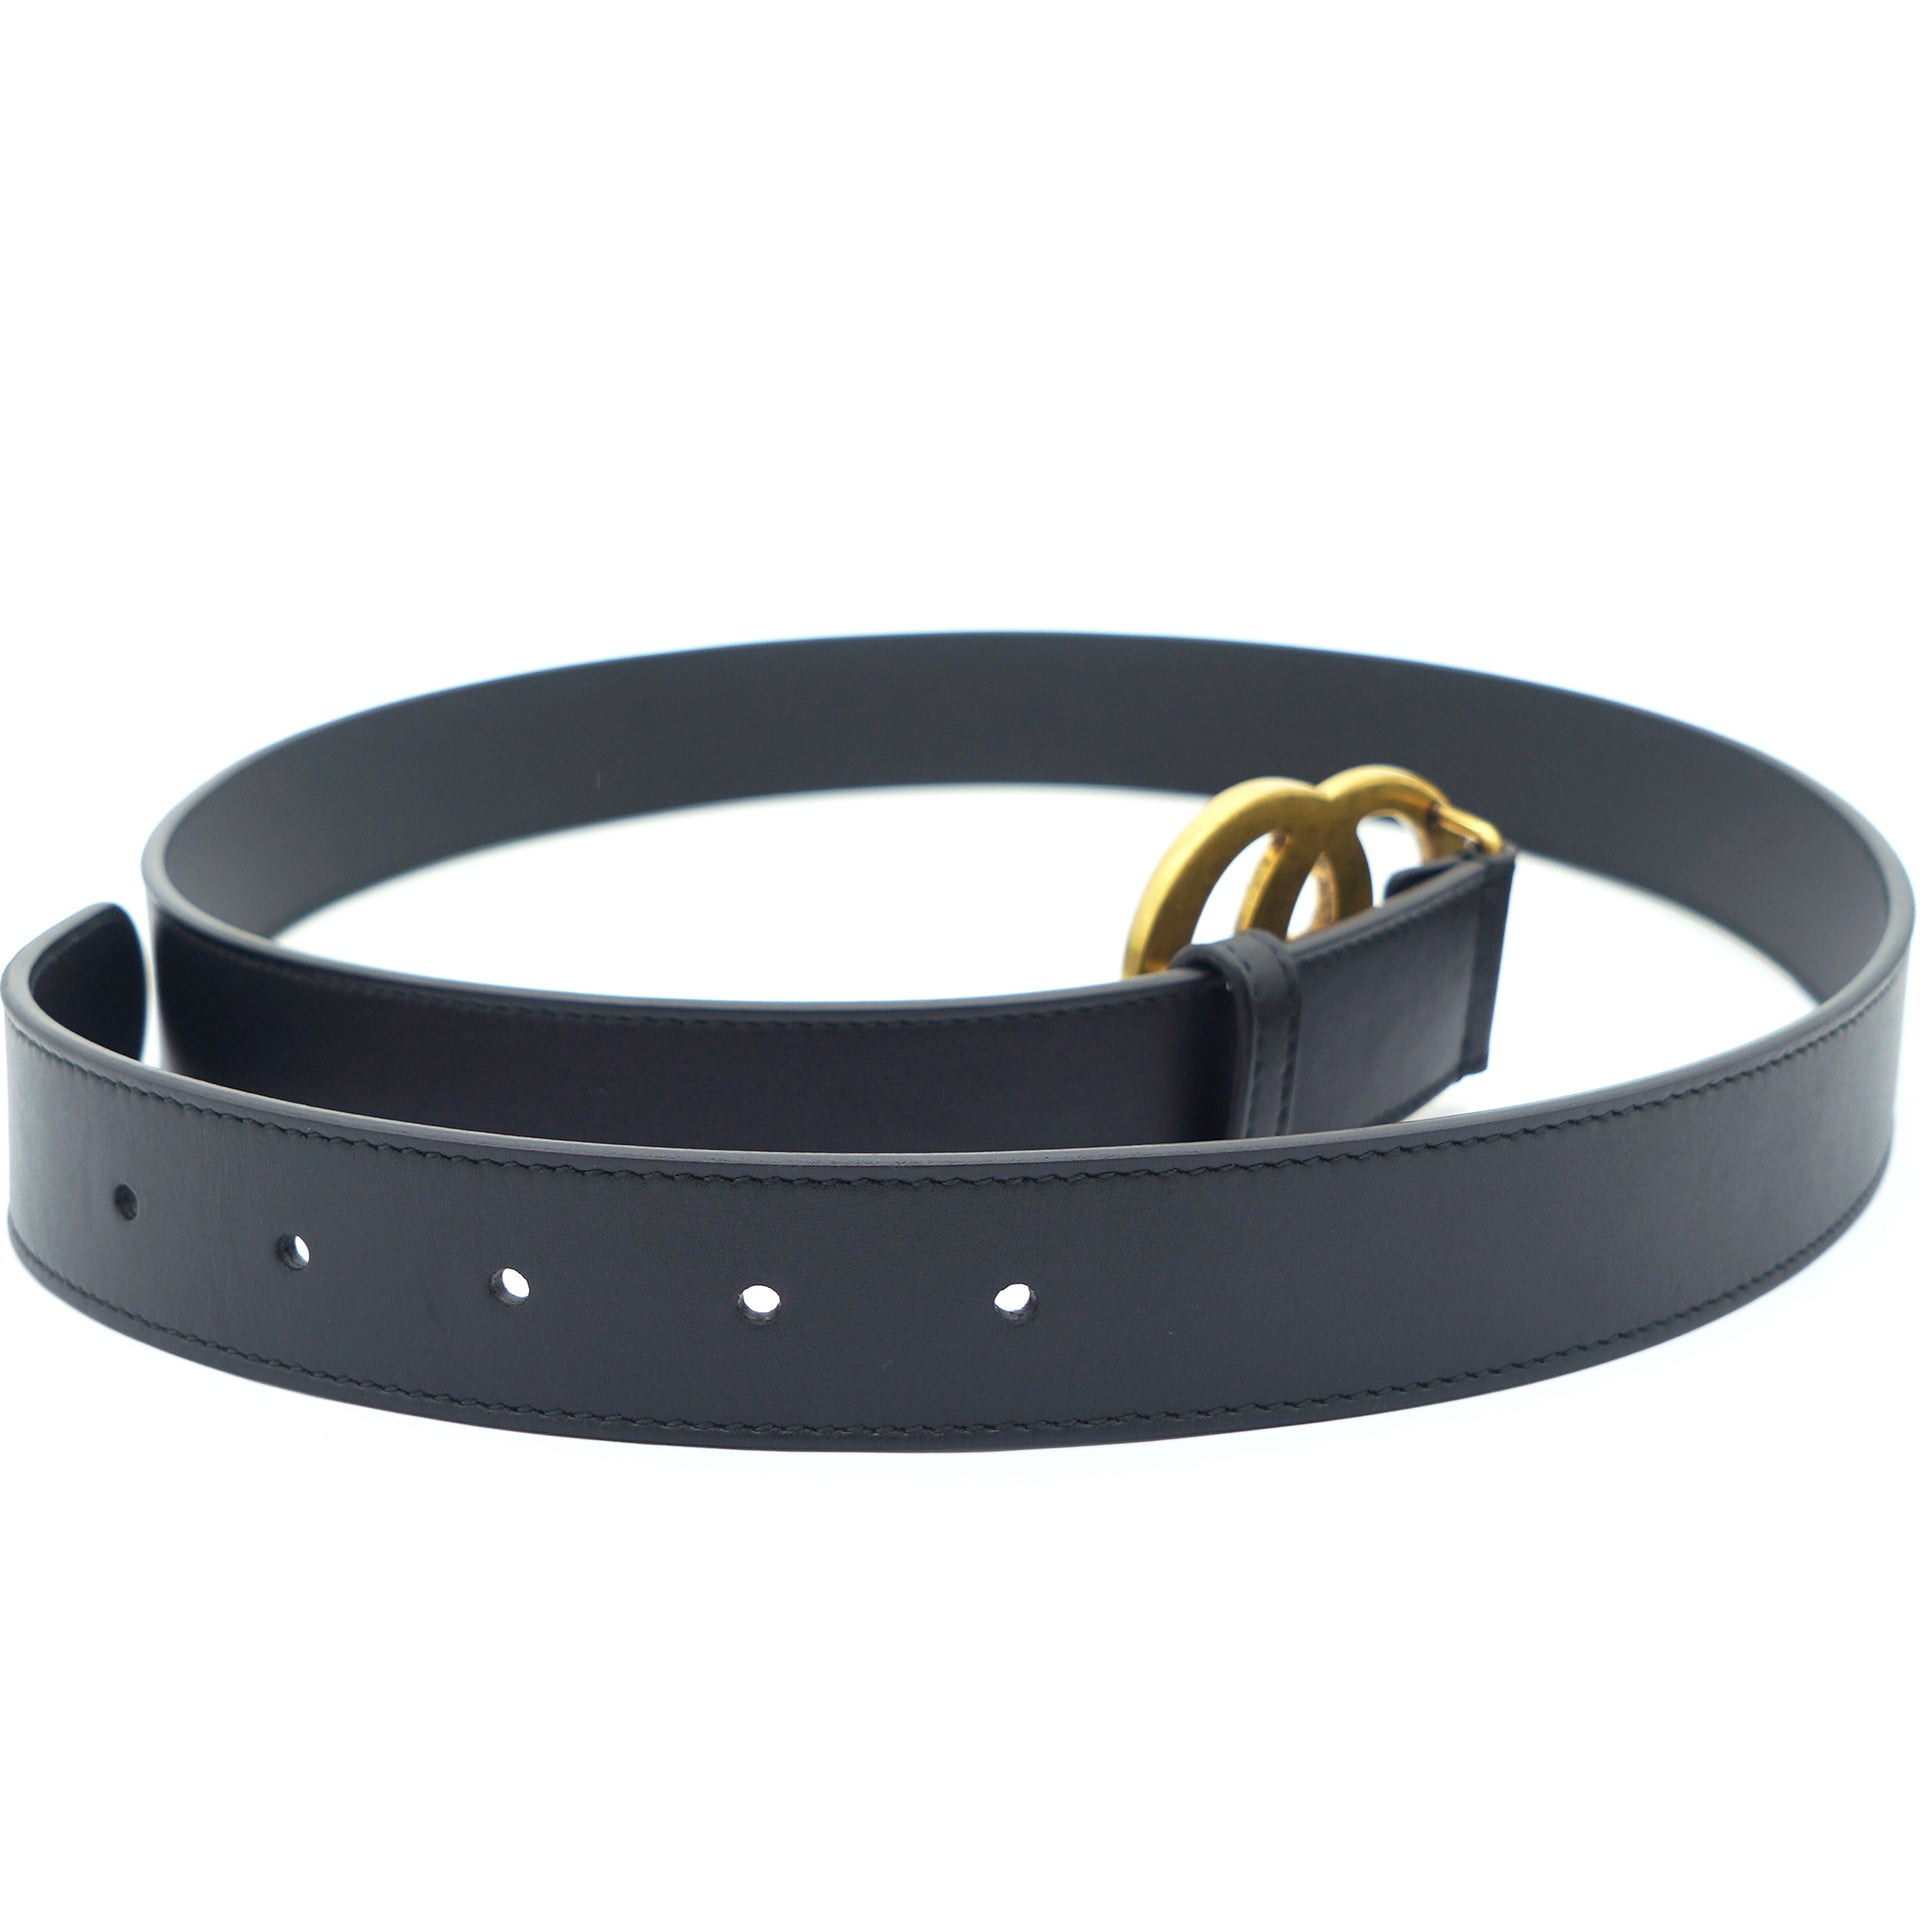 Men's Slim Black Leather Belt With Gold Double G Buckle